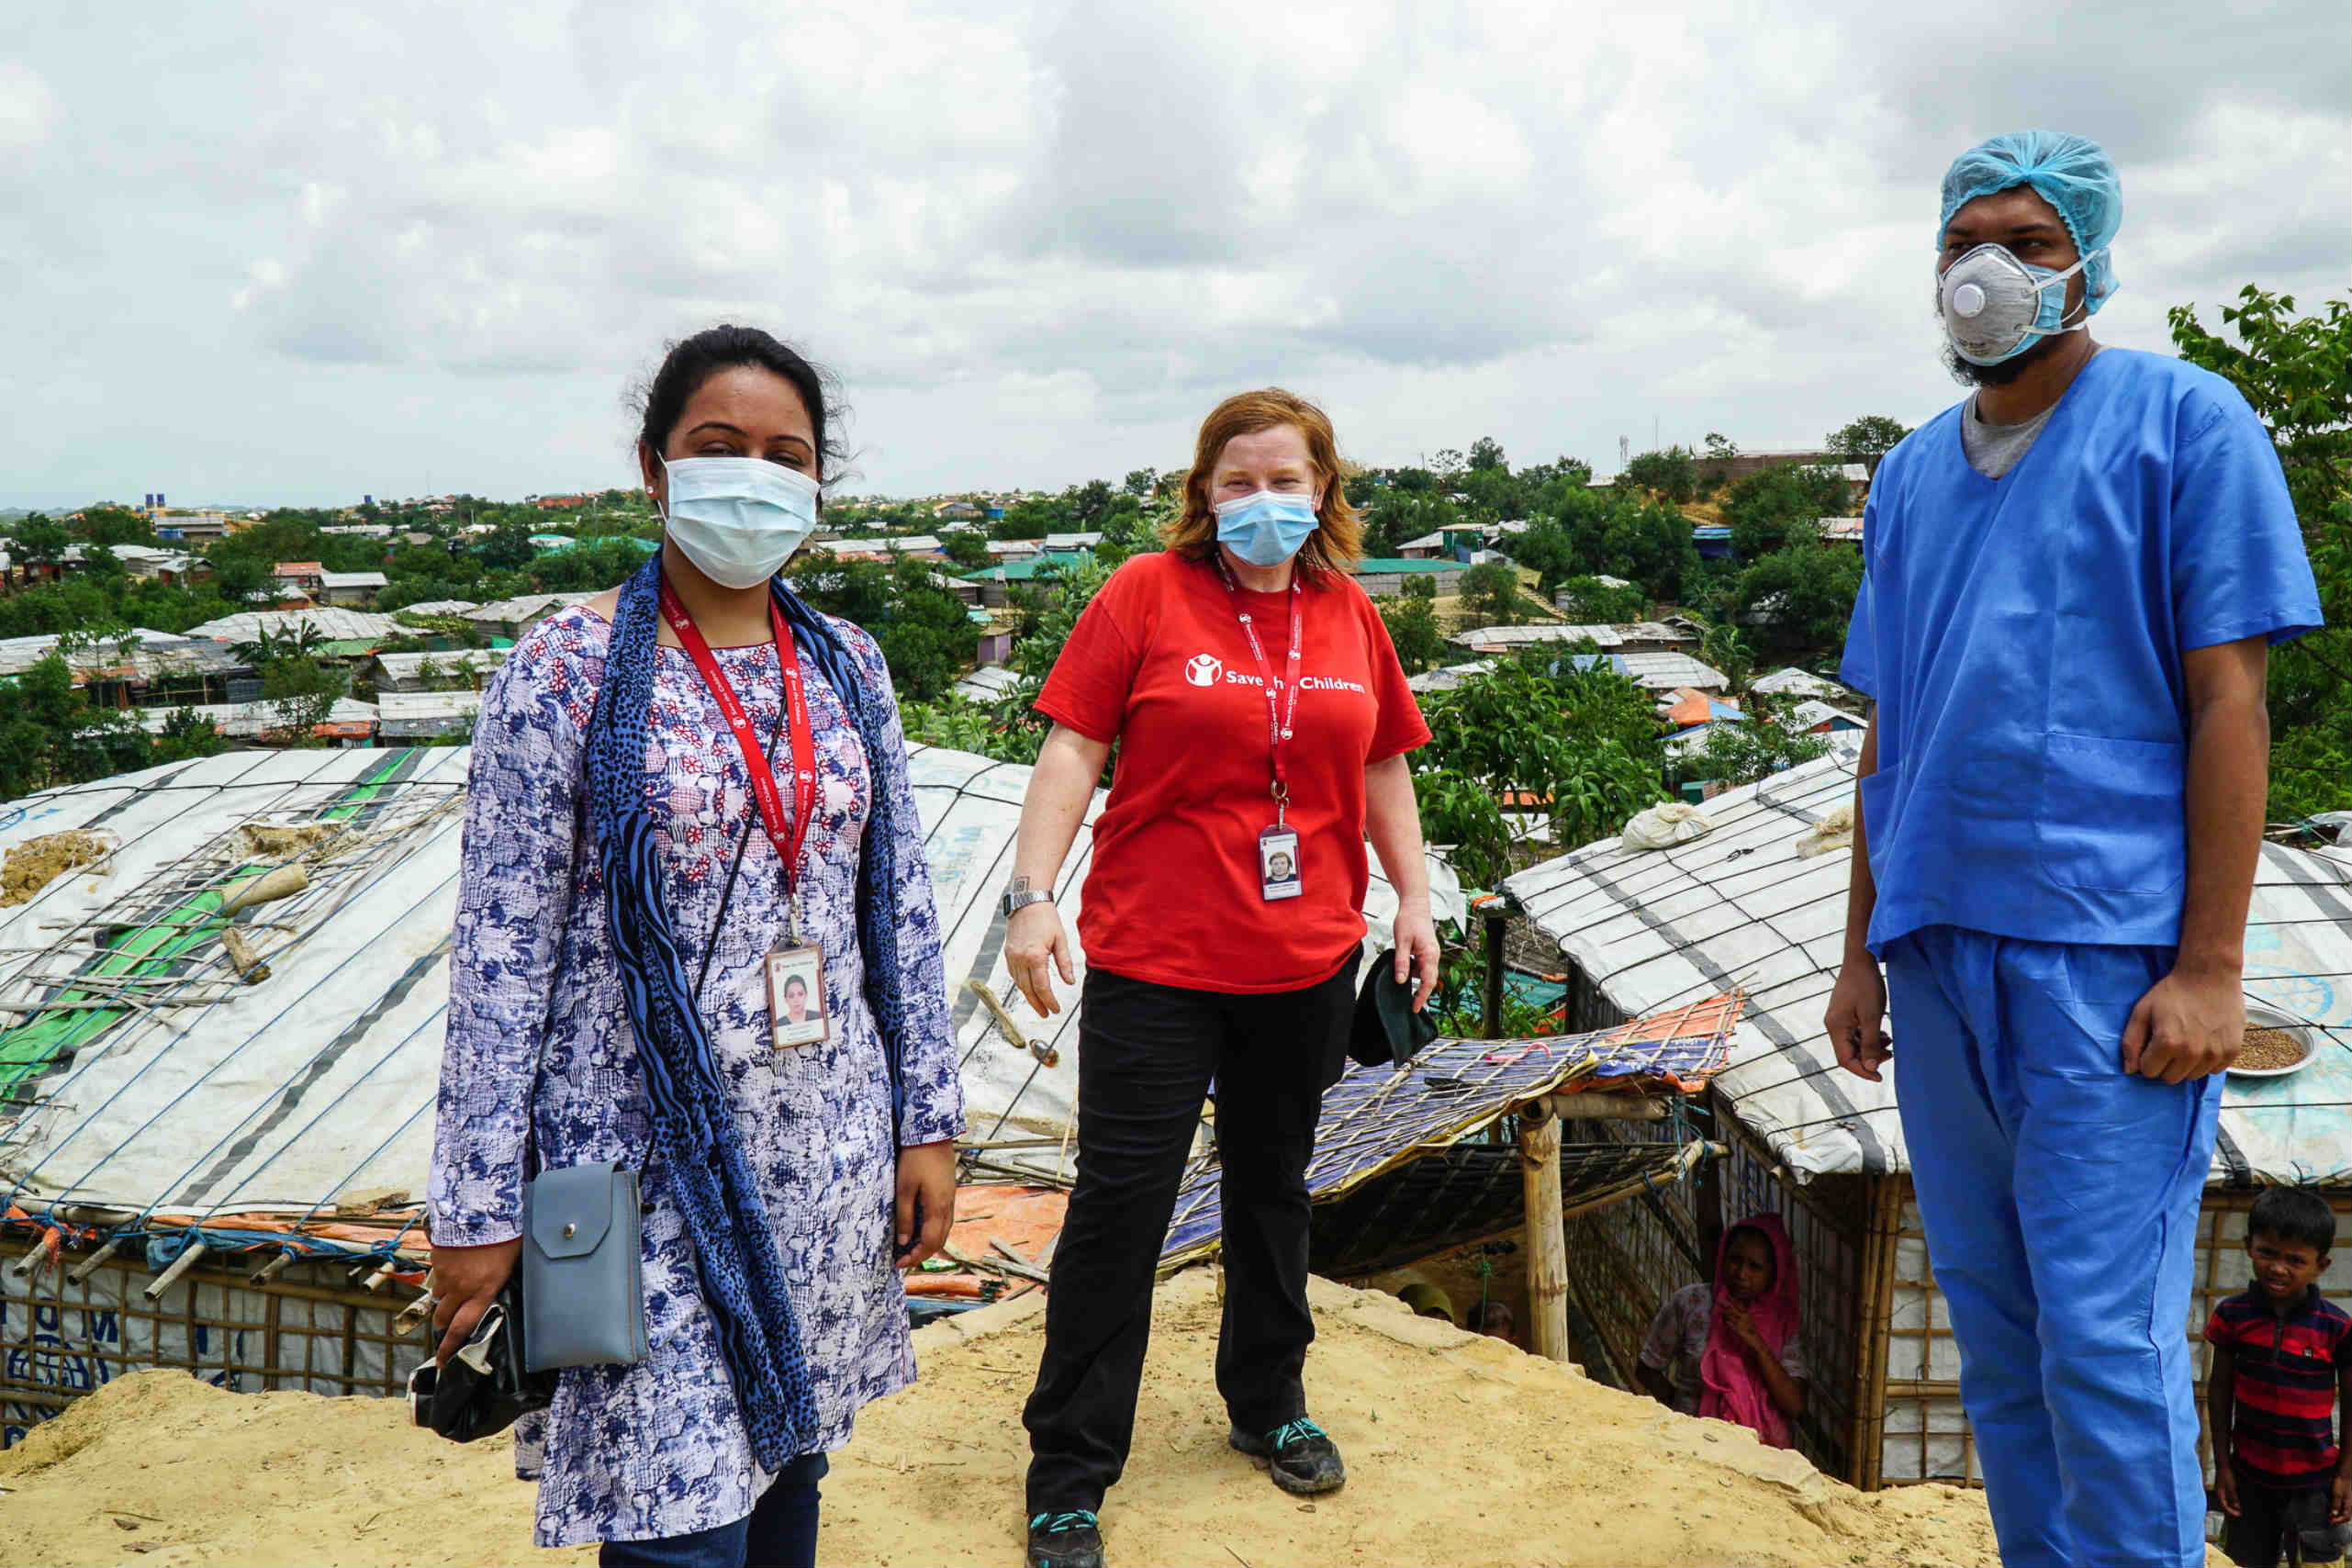 Dr Nabila (left) and Rachael Cummings (middle) and Rasadul Hasan (right) are working on the COVID-19 response in Cox's Bazar